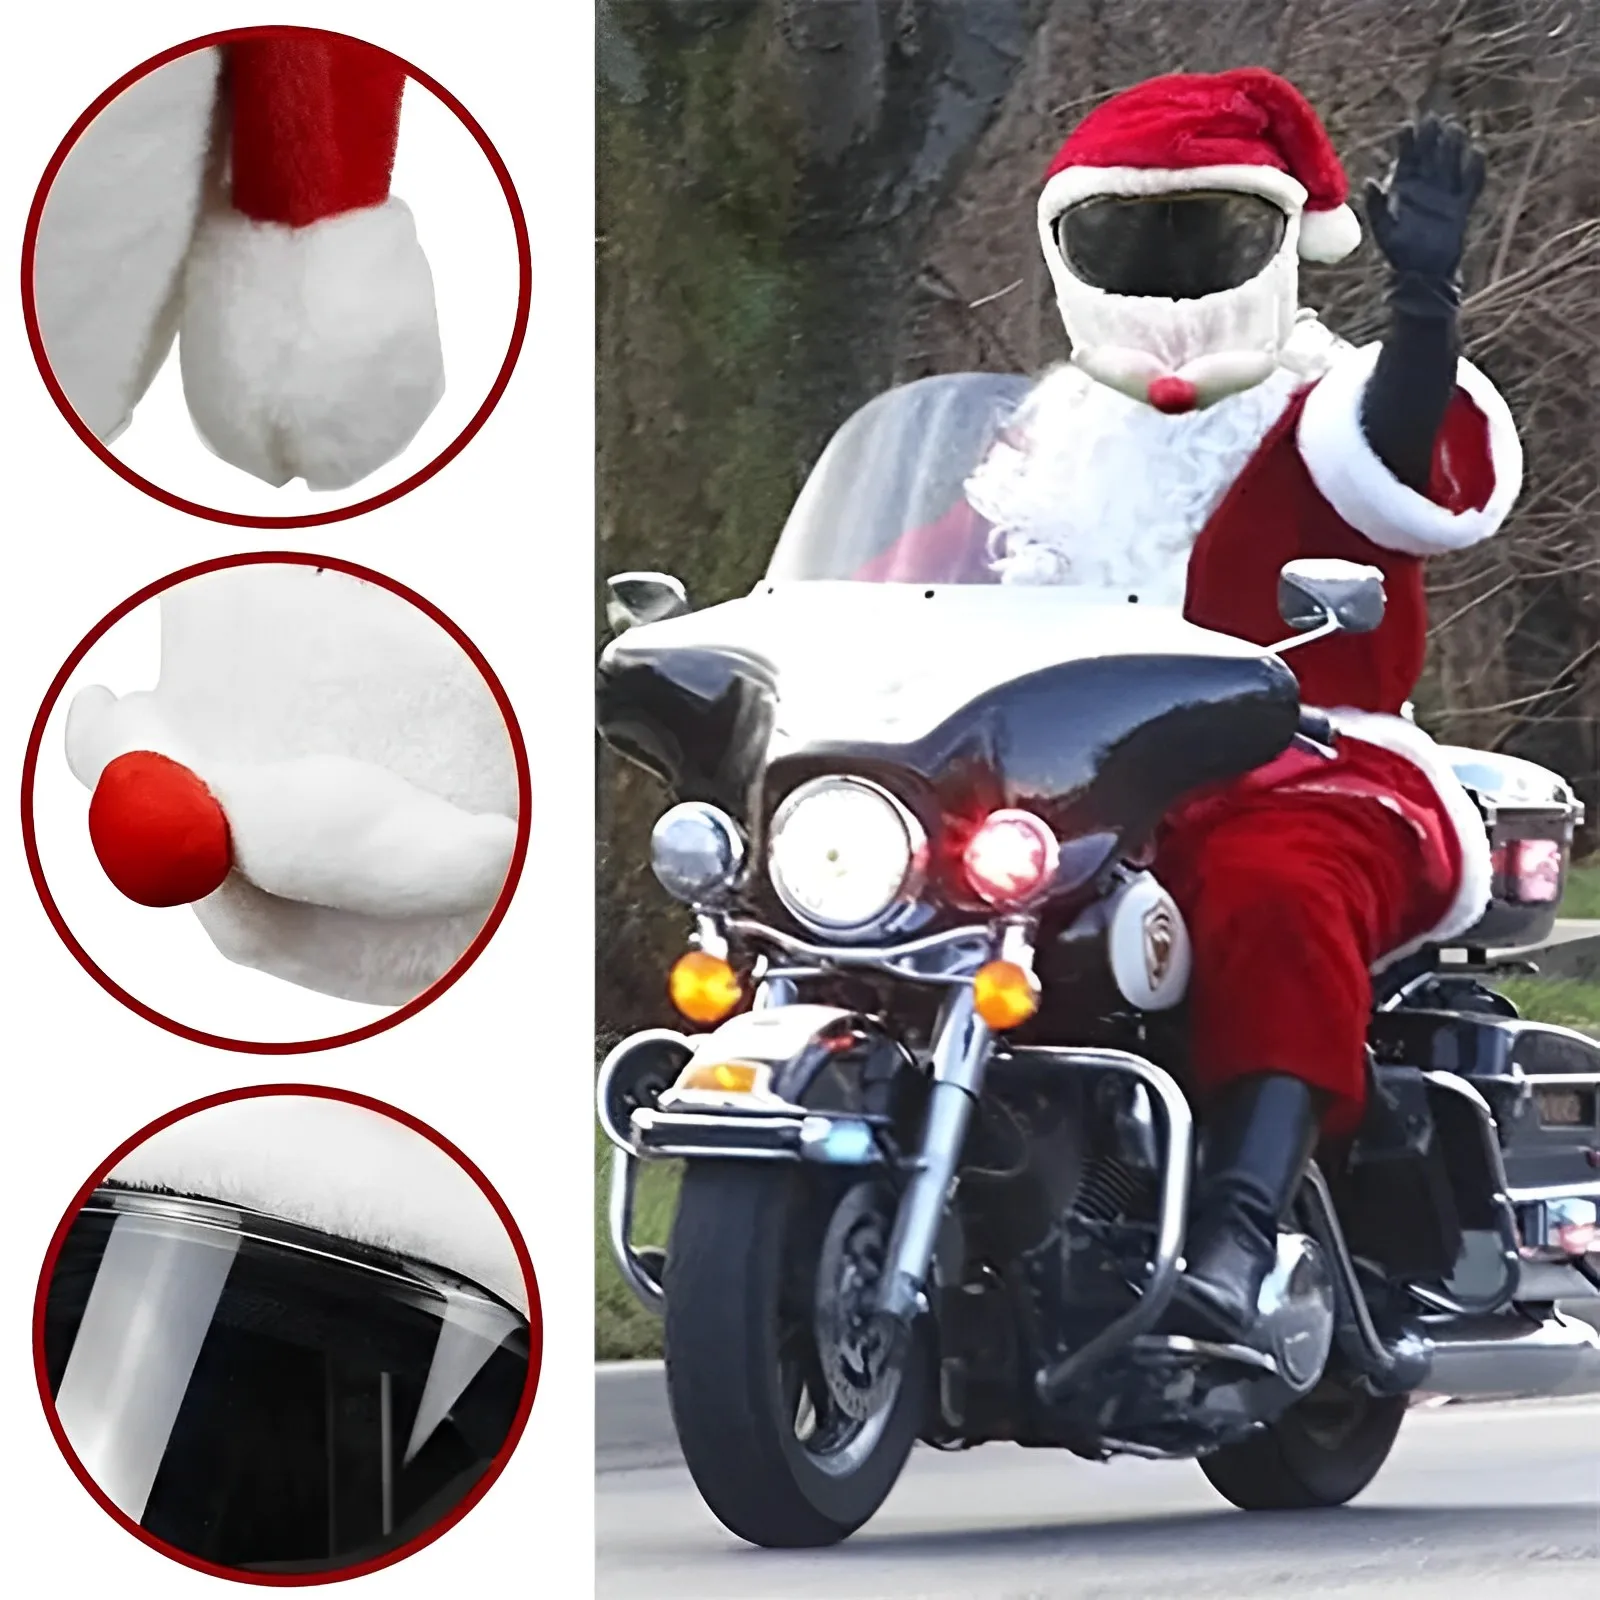 Motorcycle Helmet Christmas Hat - Red and White Plush Santa Claus Cover - $21.28